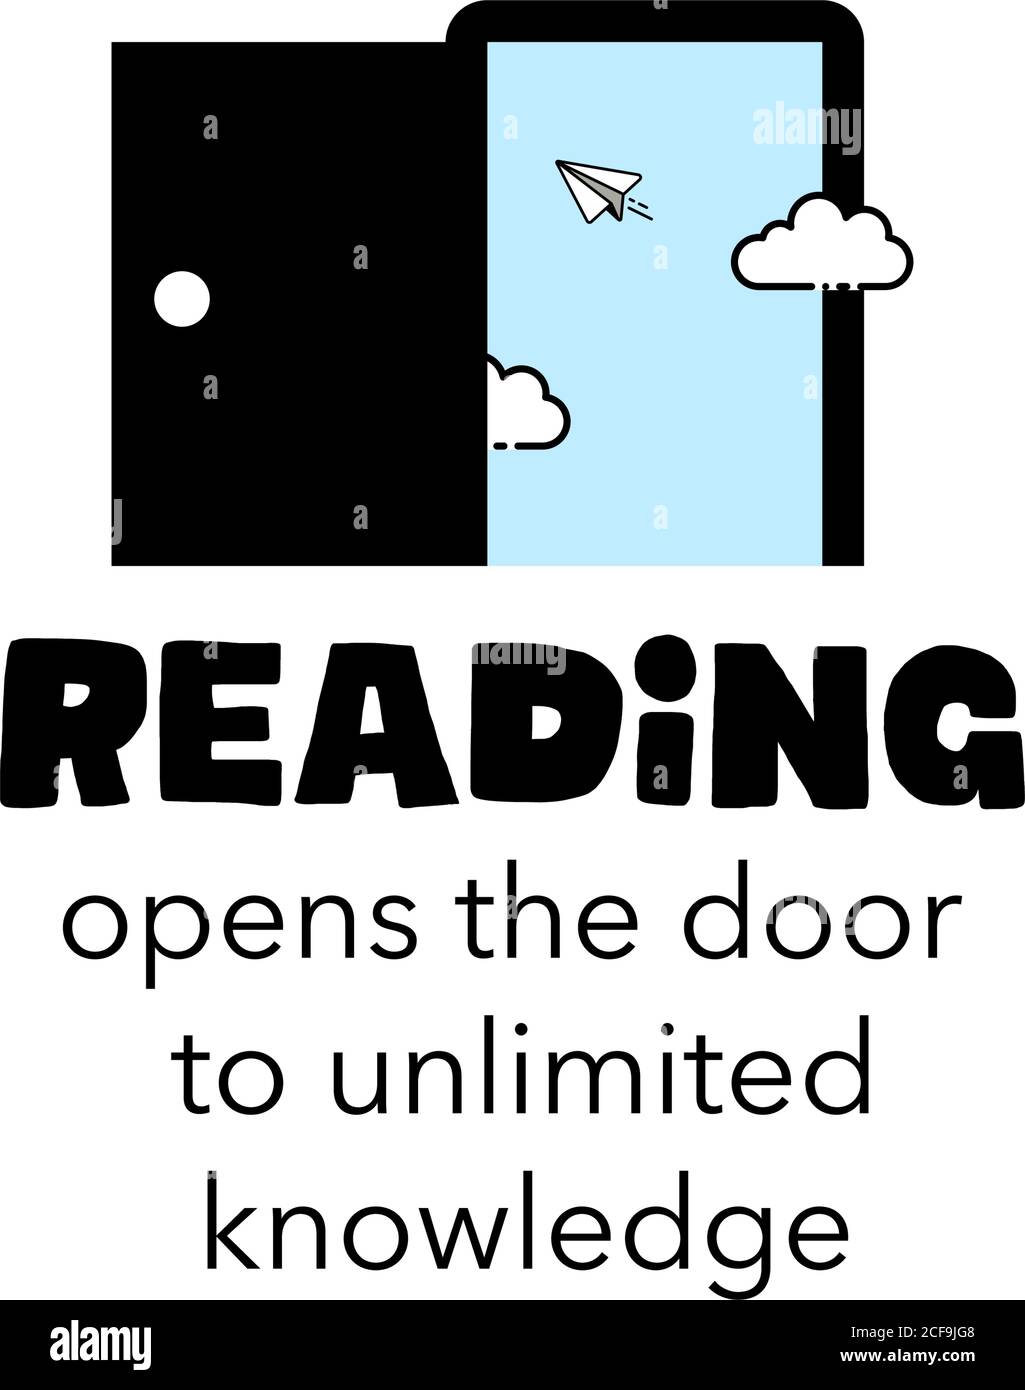 Reading ope the door to unlimited knowledge. Design about International Literacy Day celebration, 8th September. illustration vector. Stock Vector